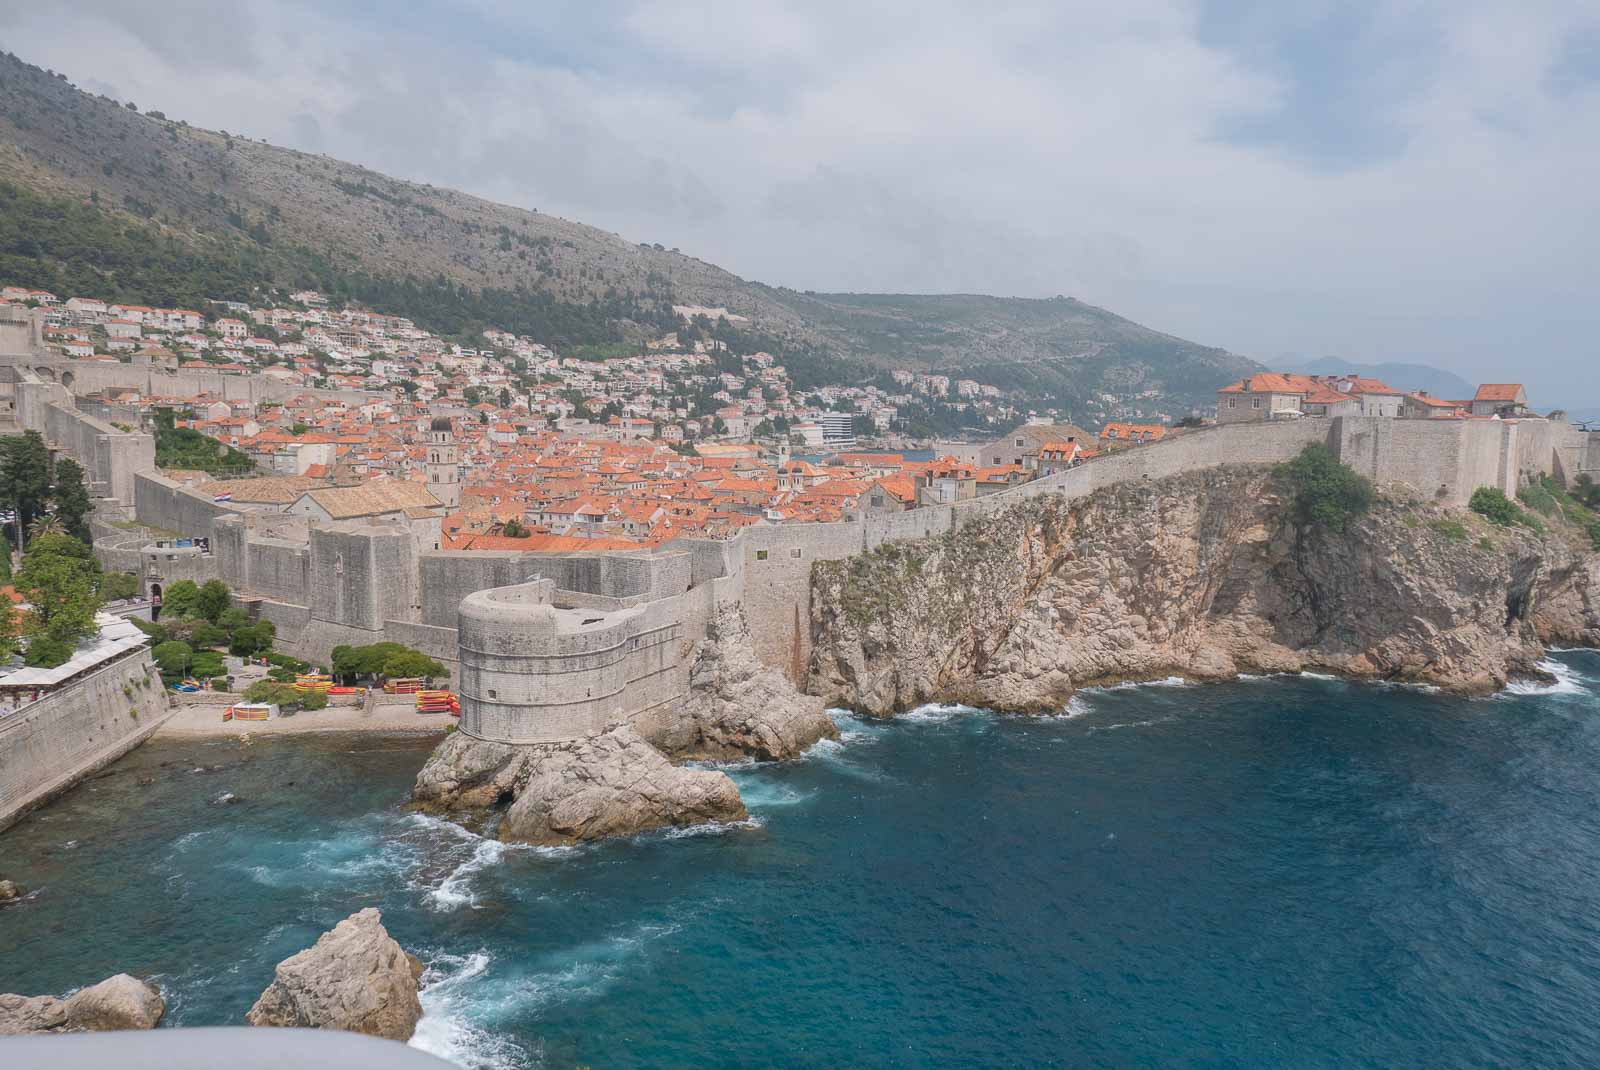 Views over Dubrovnik and the Adriatic Sea.